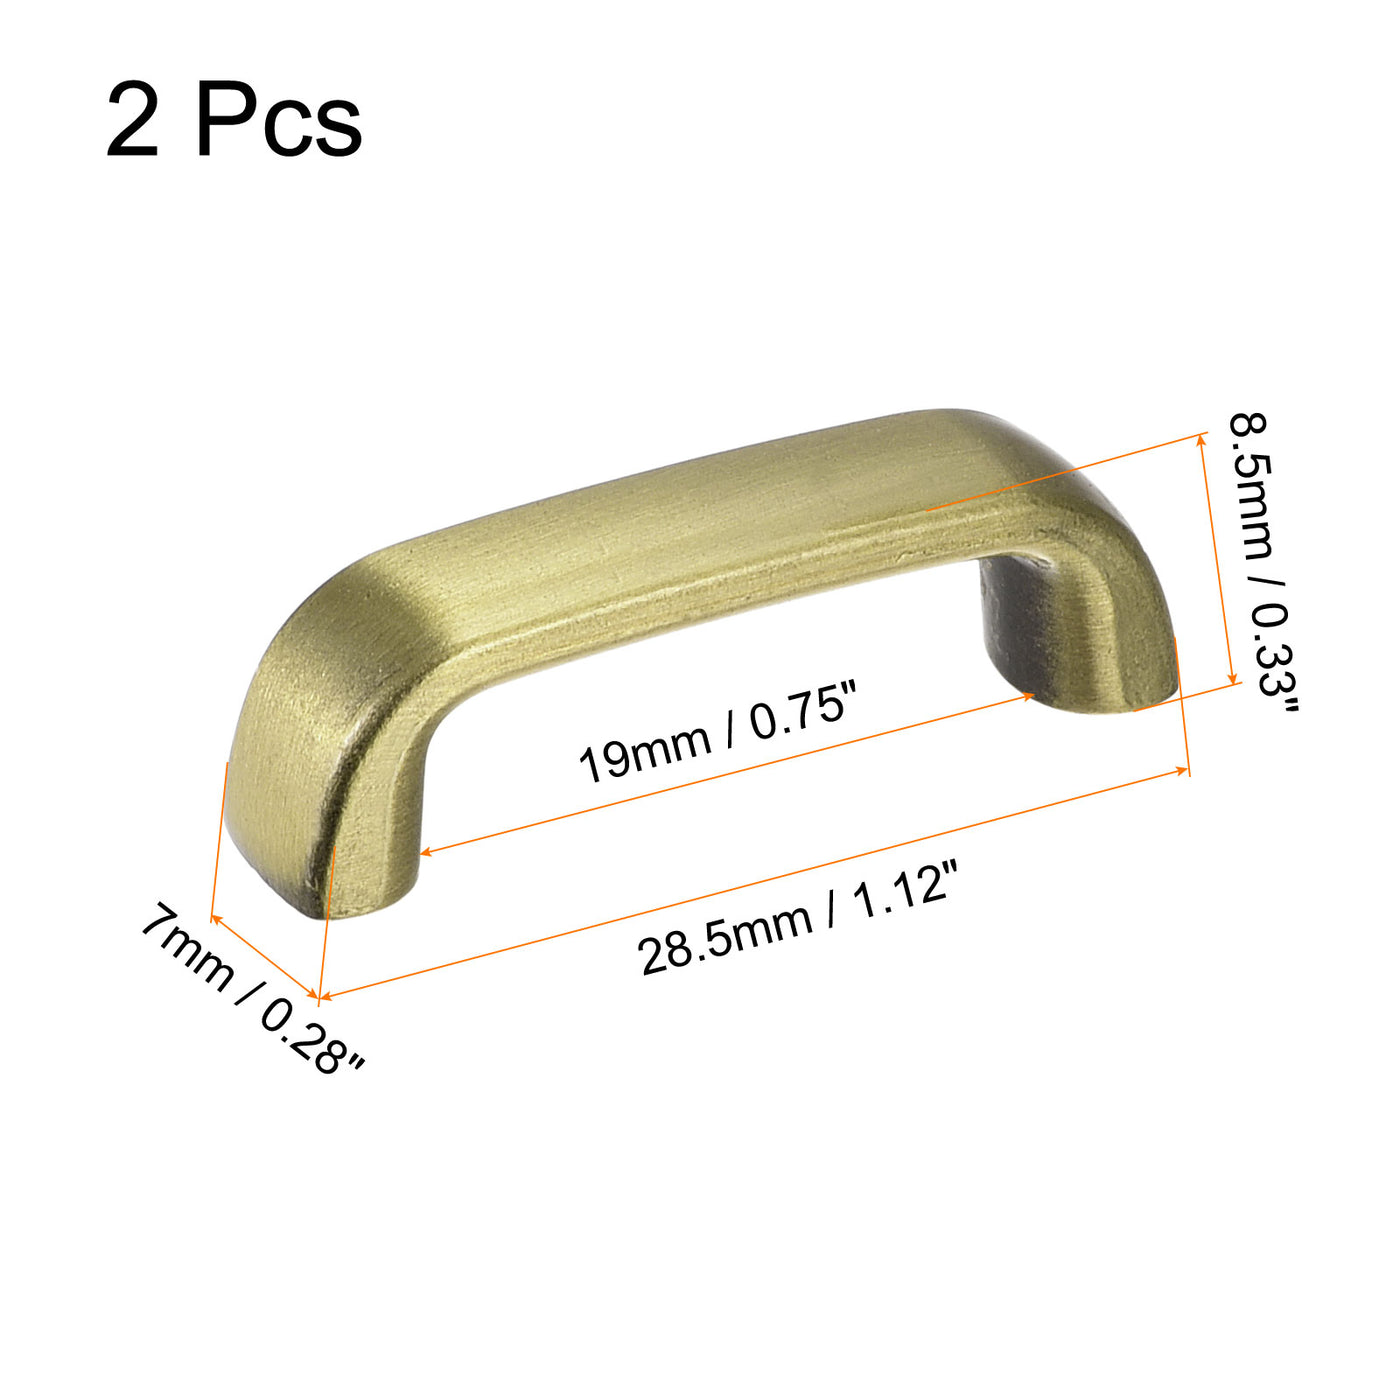 Uxcell Uxcell Arch Bridge Buckle, 2Pcs 30mm D-Ring Connector Buckles for Bag Hanger DIY, Gold